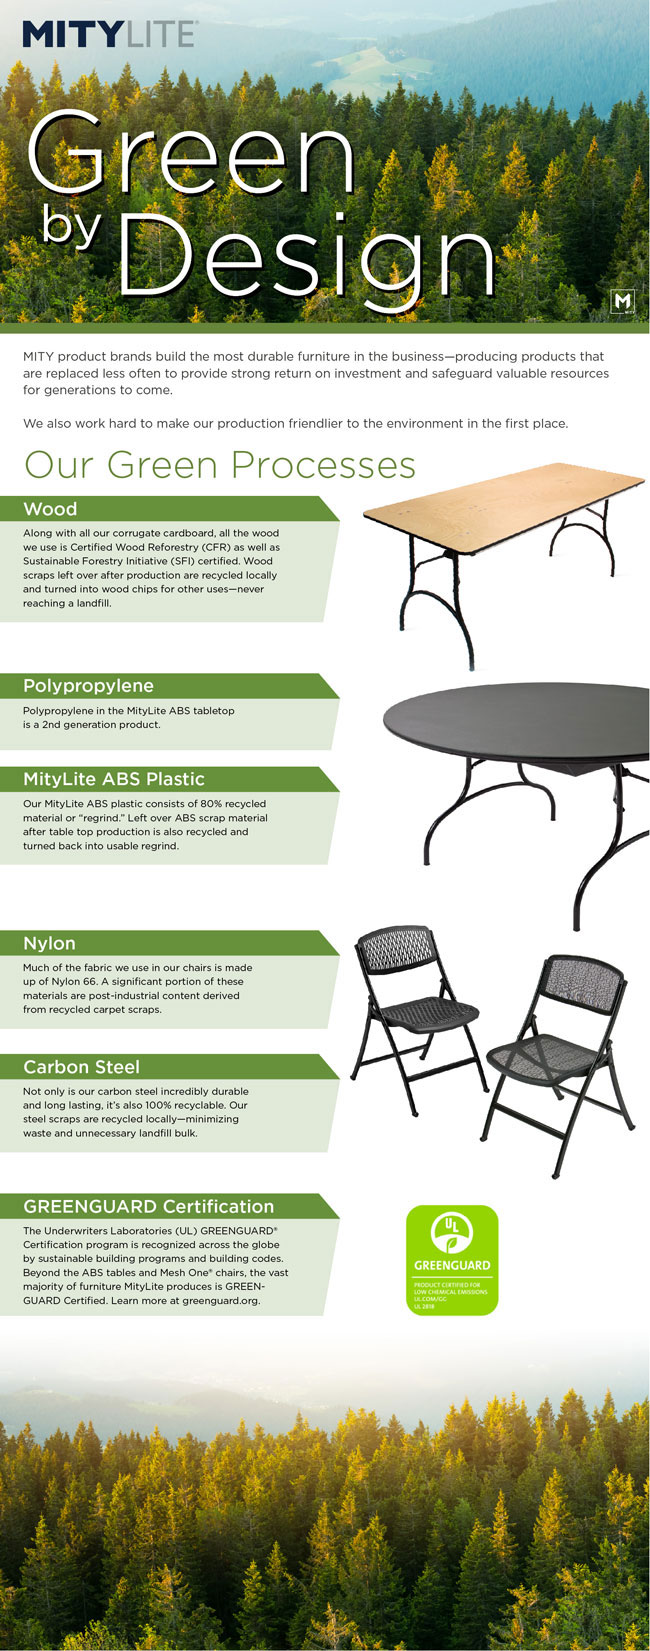 Gree by Design Info Graphic